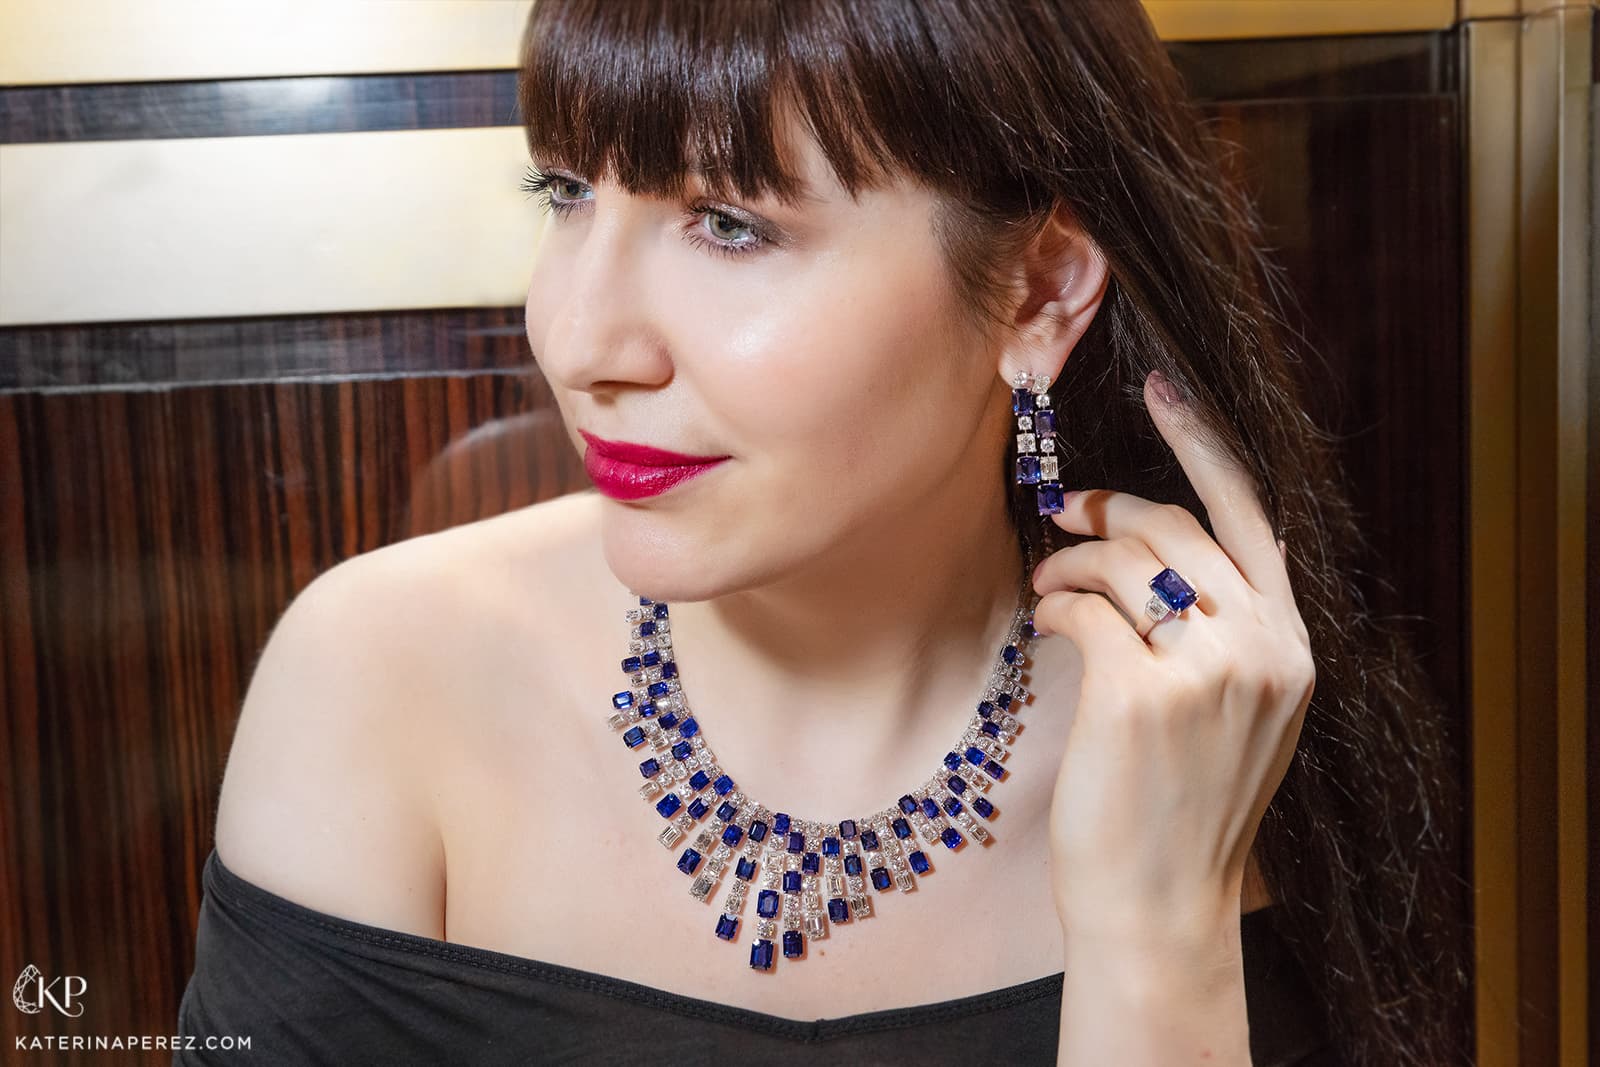 Luvor's Place Vendome high jewellery suite. The necklace alone is set with 63 perfectly matched Sri Lankan sapphires